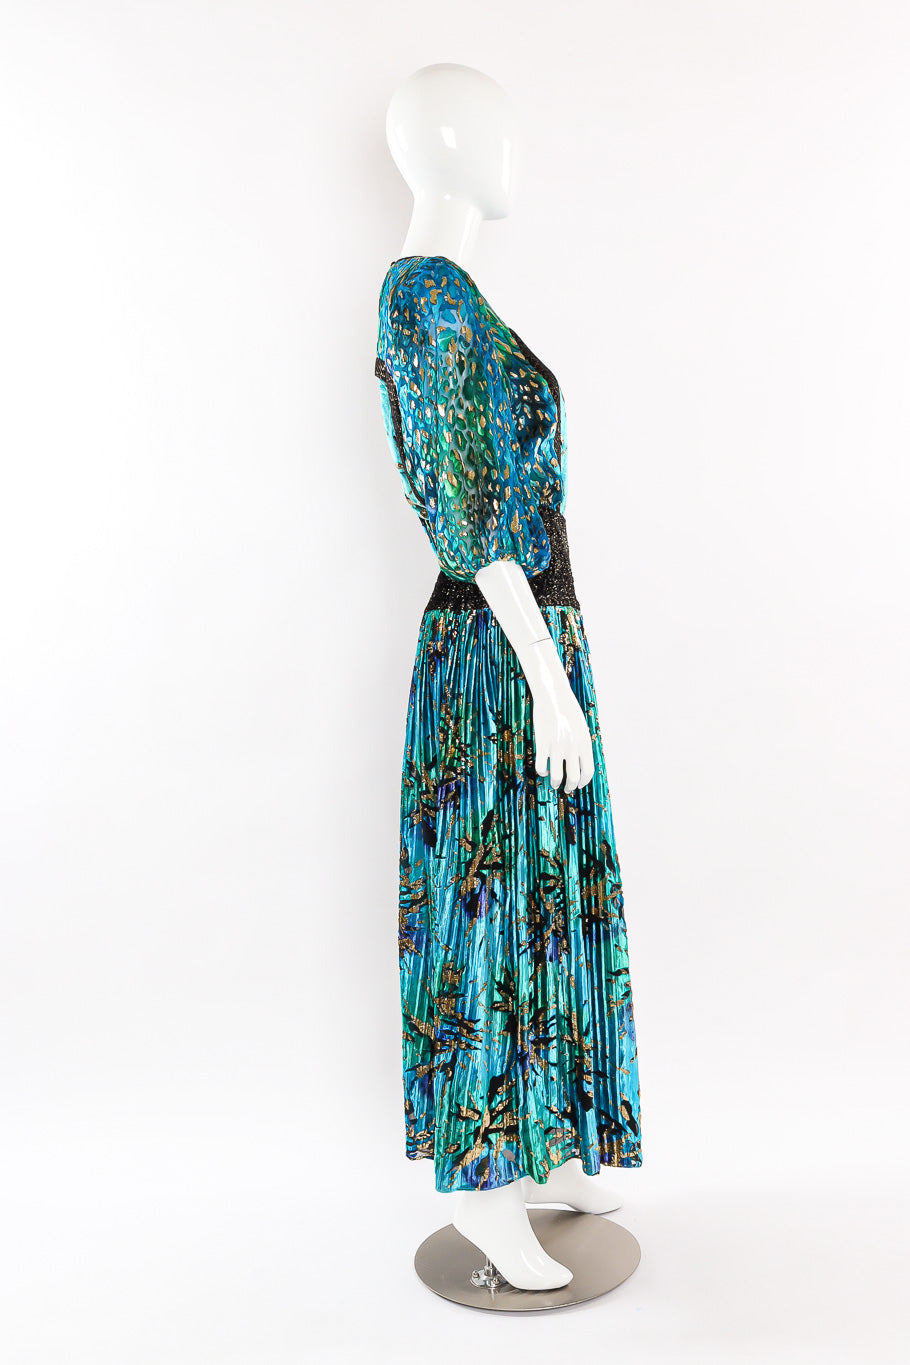 Multi-printed silk limited edition dress by Diane Freis Side View @recessla